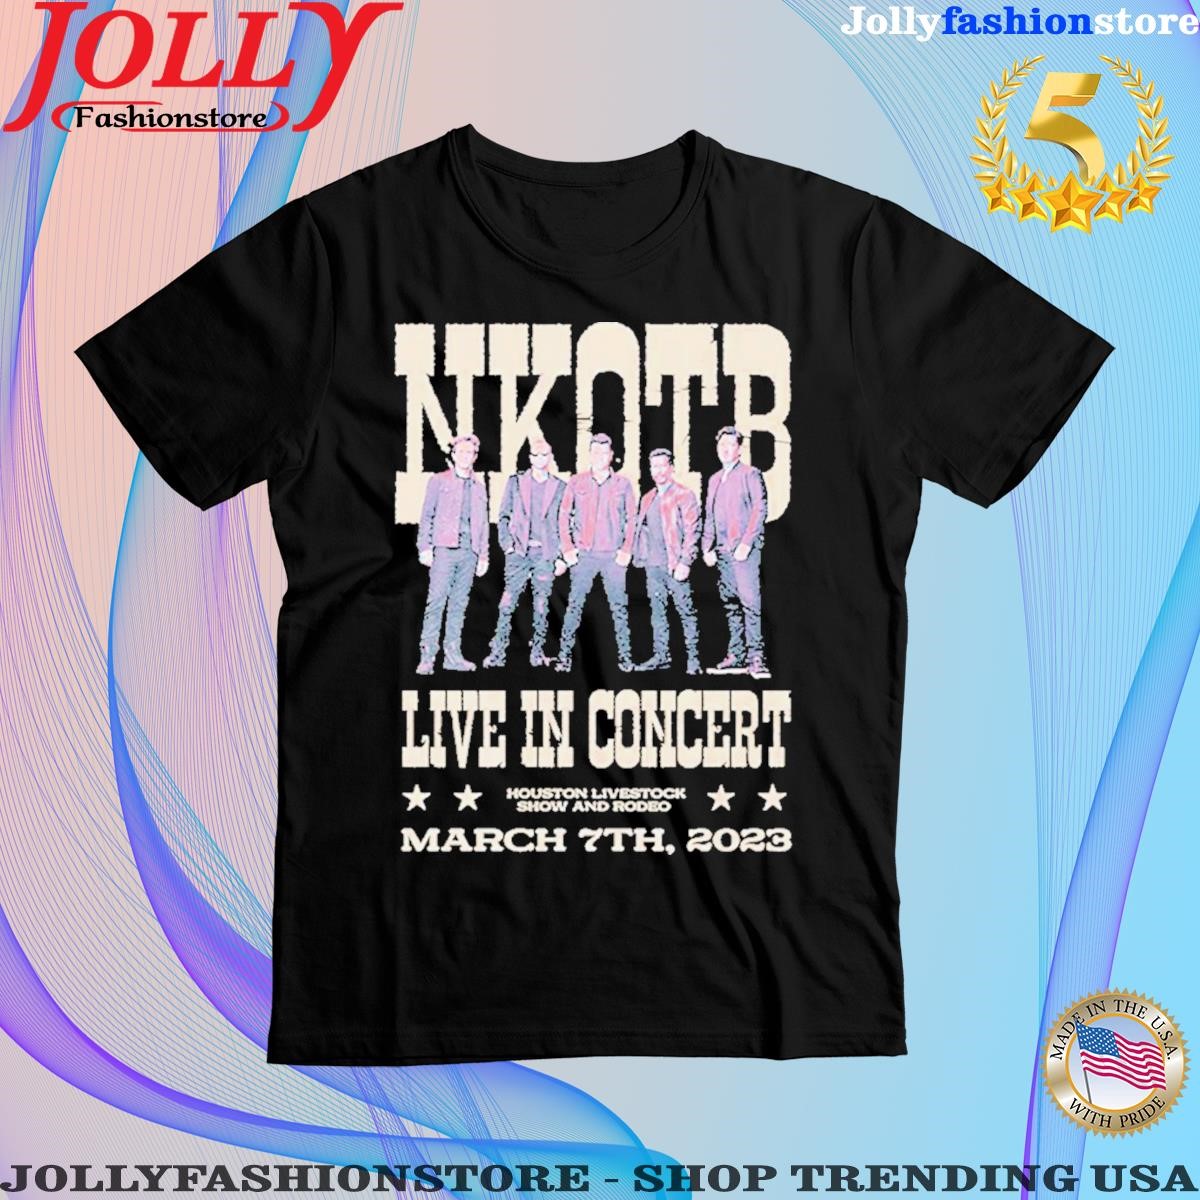 Nkotb live in concert houston livestock show and rodeo march 7th 2023 shirt